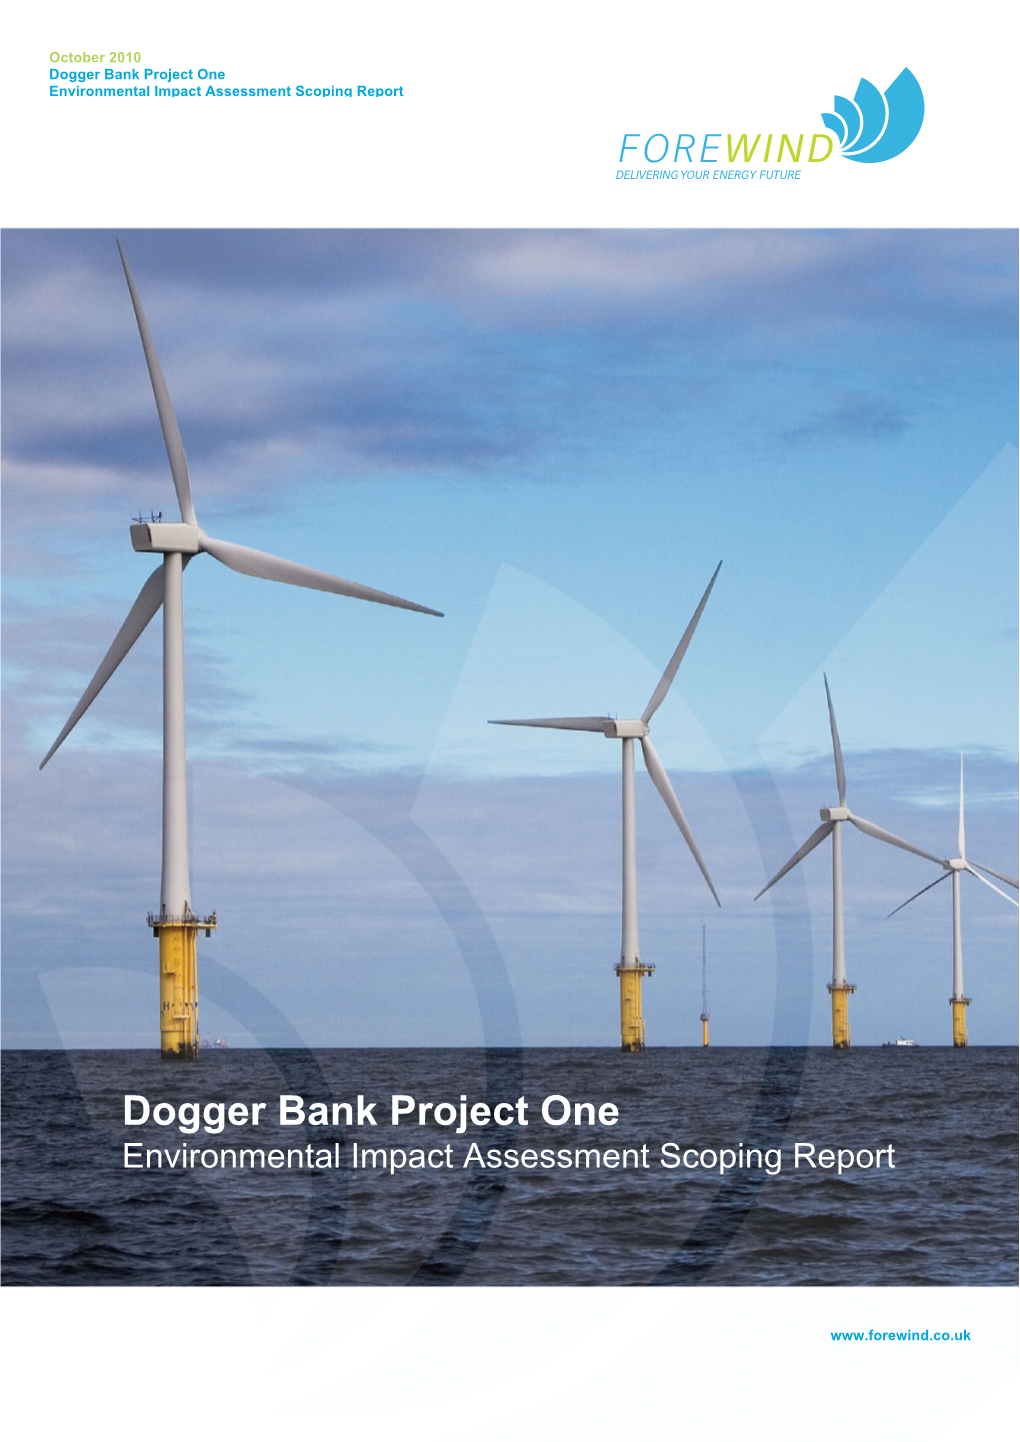 Dogger Bank Project One Environmental Impact Assessment Scoping Report